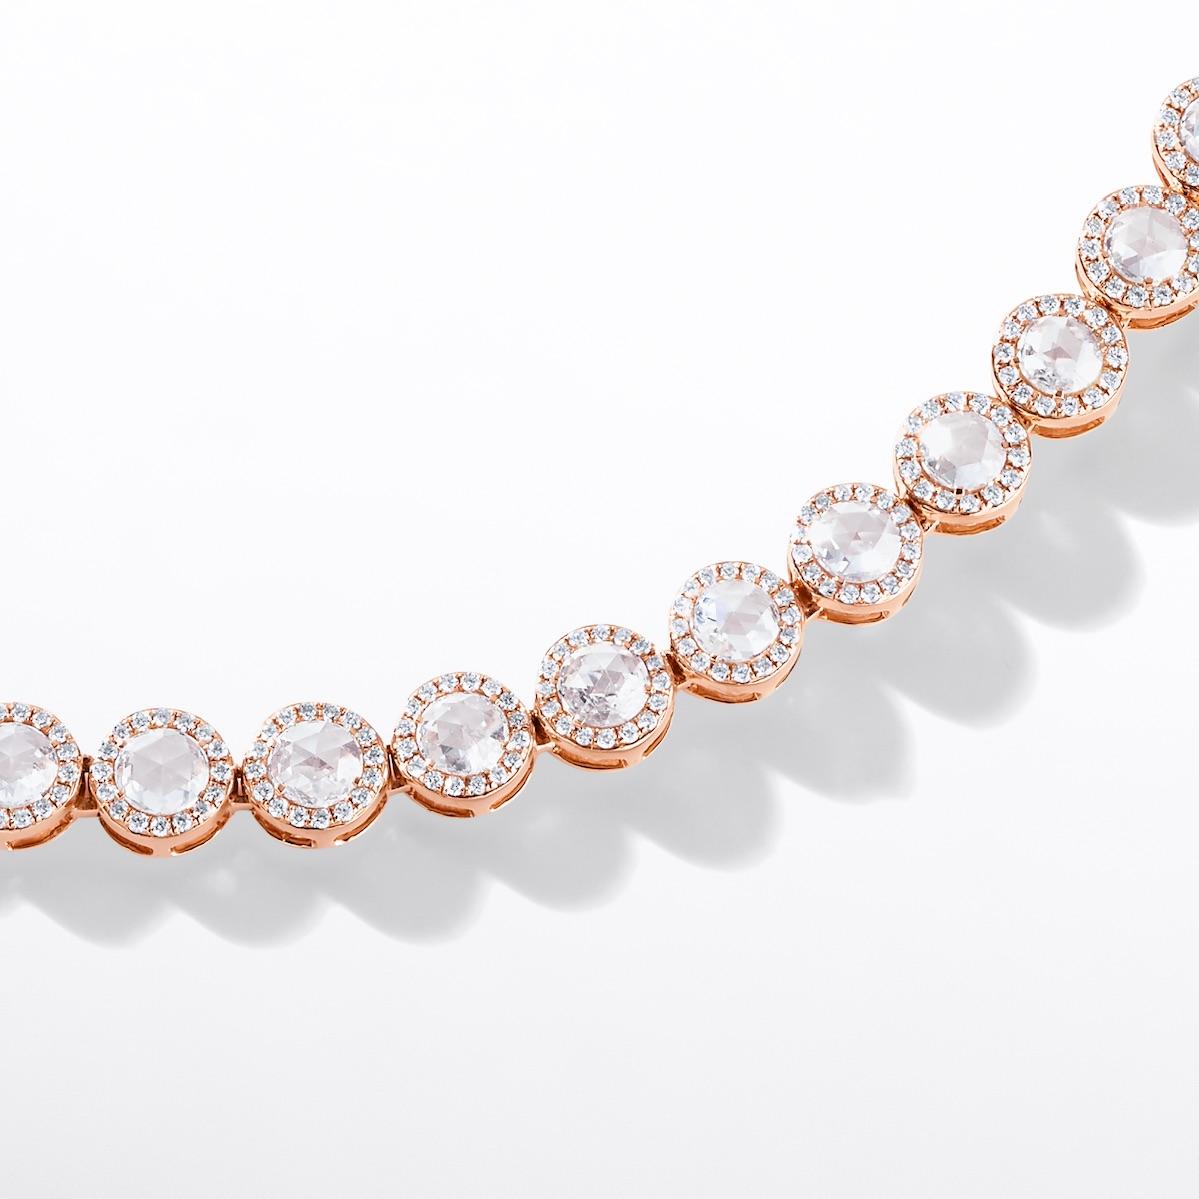 64Facets 9 Carat Rose Cut Diamond Necklace with Pave Accents in Rose Gold For Sale 1